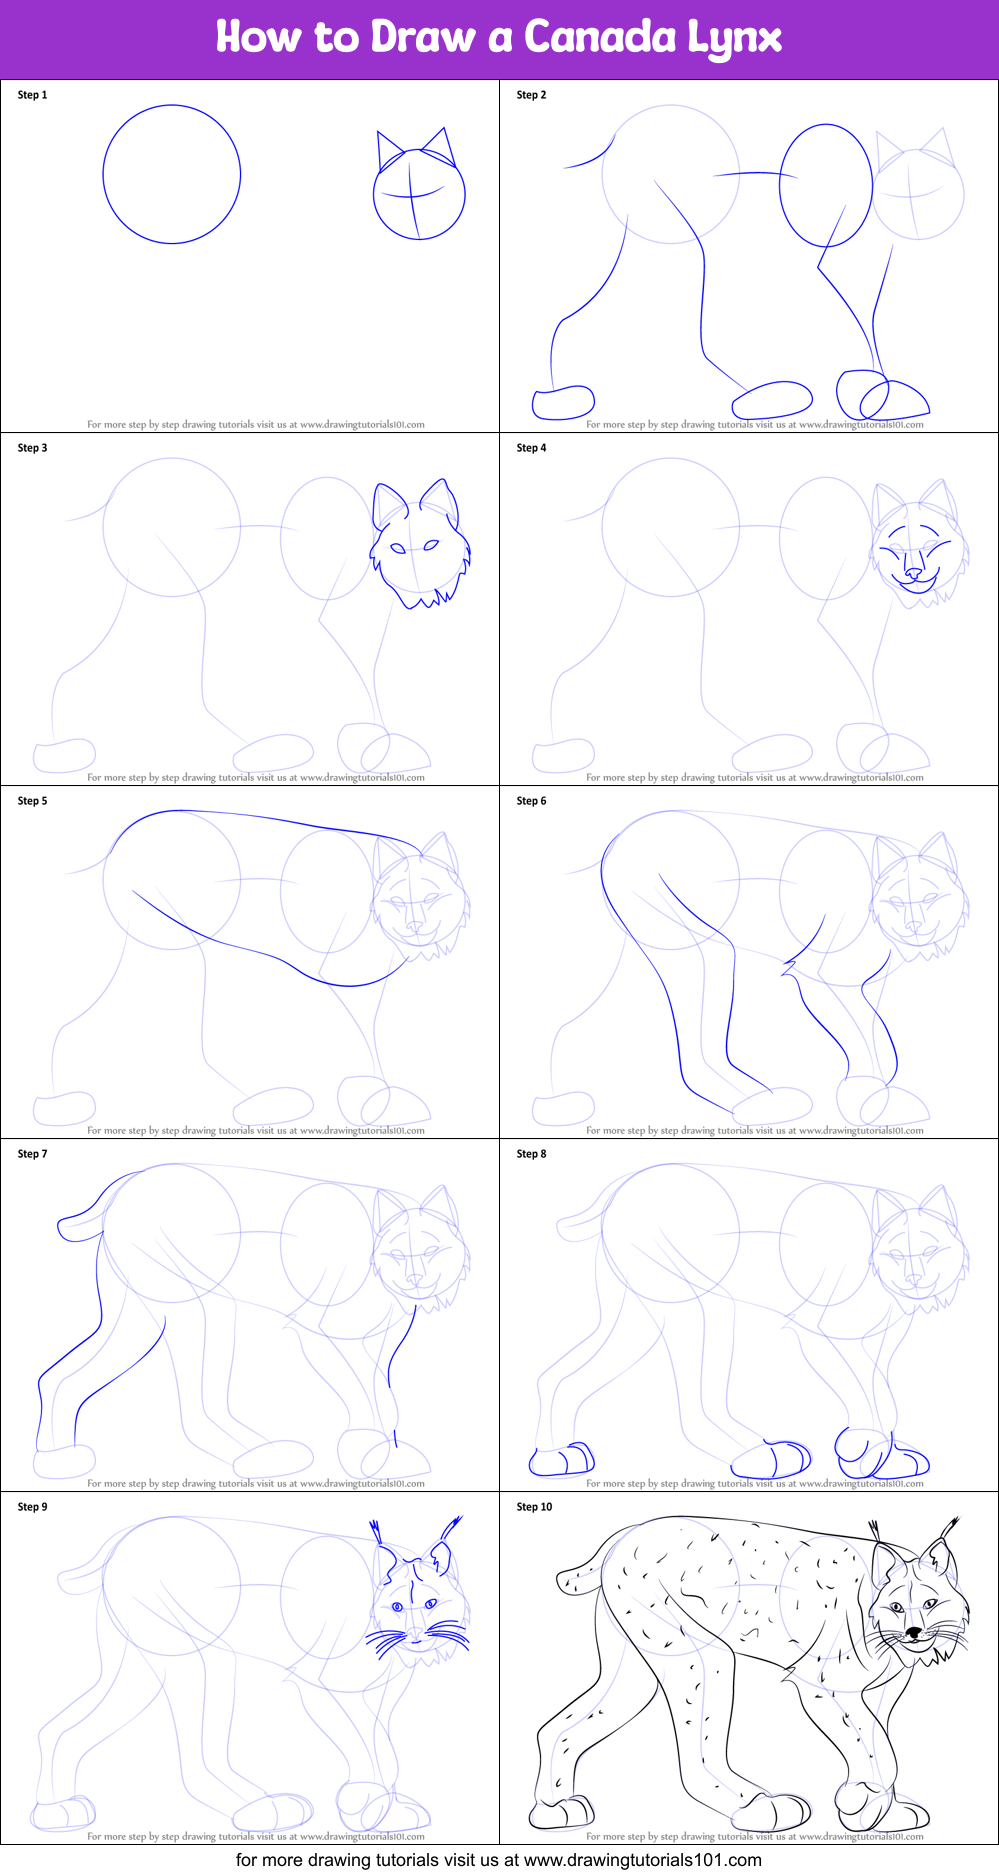 How to Draw a Canada Lynx printable step by step drawing sheet